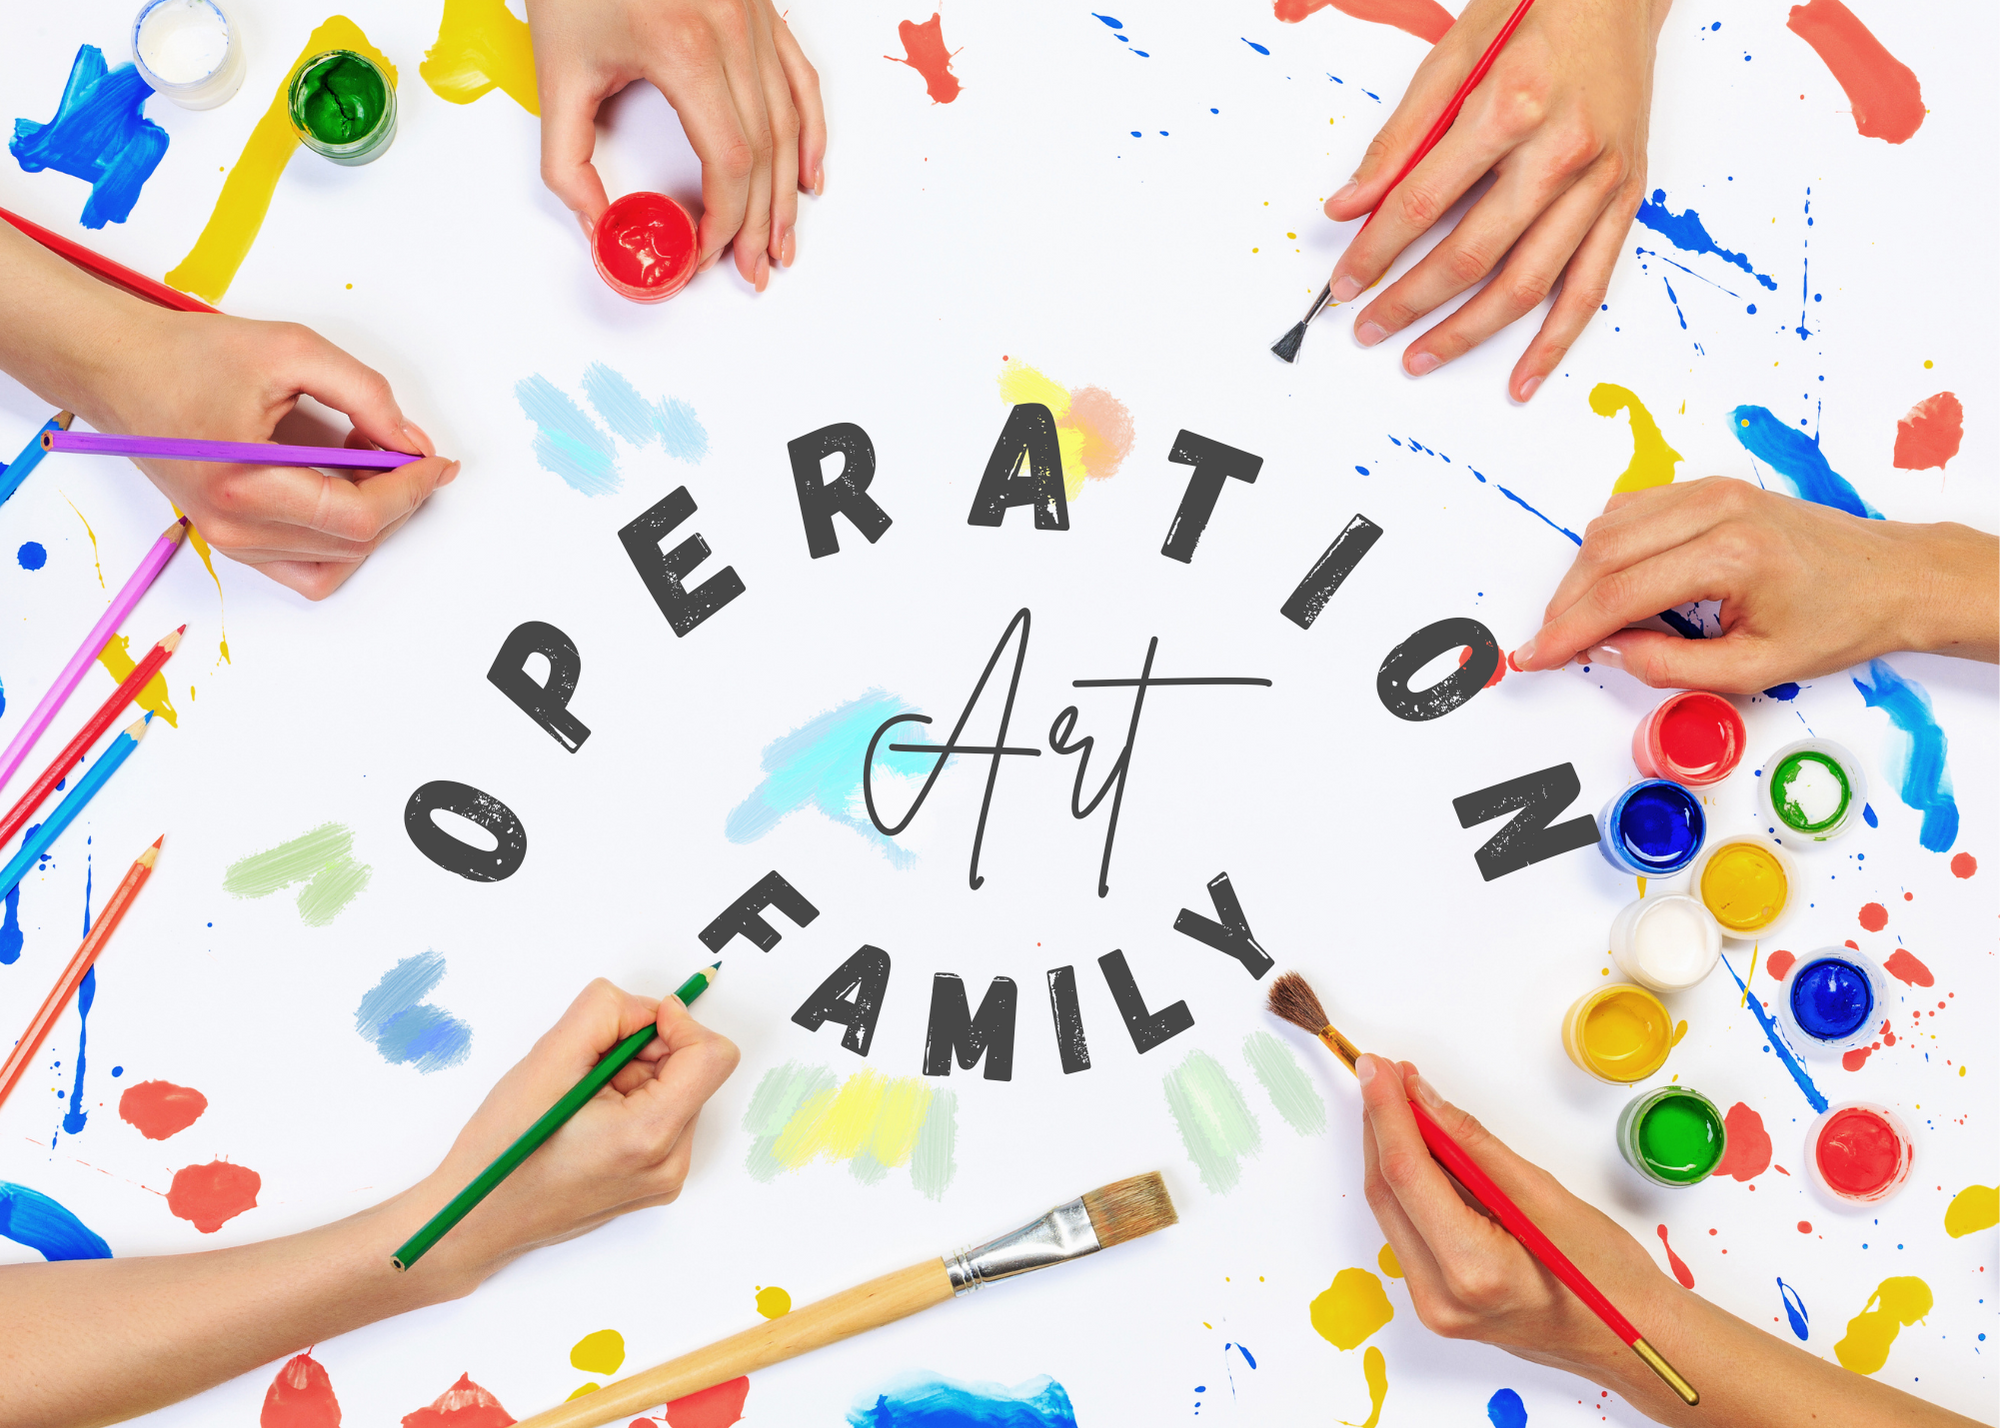 Hands painting together operation art family poster